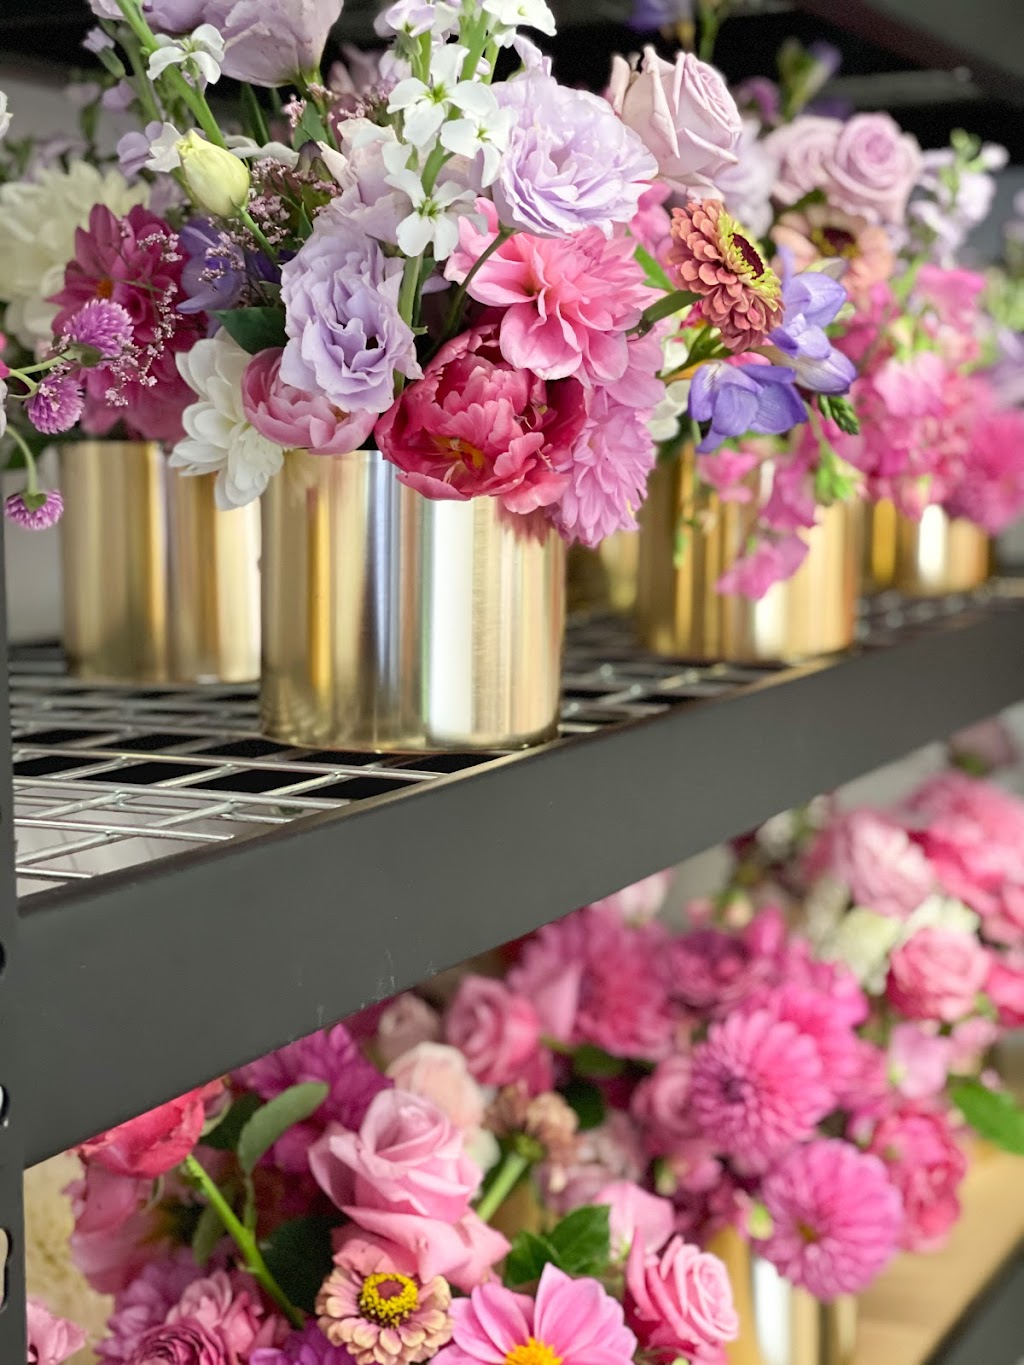 Blush and Blooms Floral Studio | florist | 59 Lumsdaine St, Picton NSW 2571, Australia | 0421648589 OR +61 421 648 589